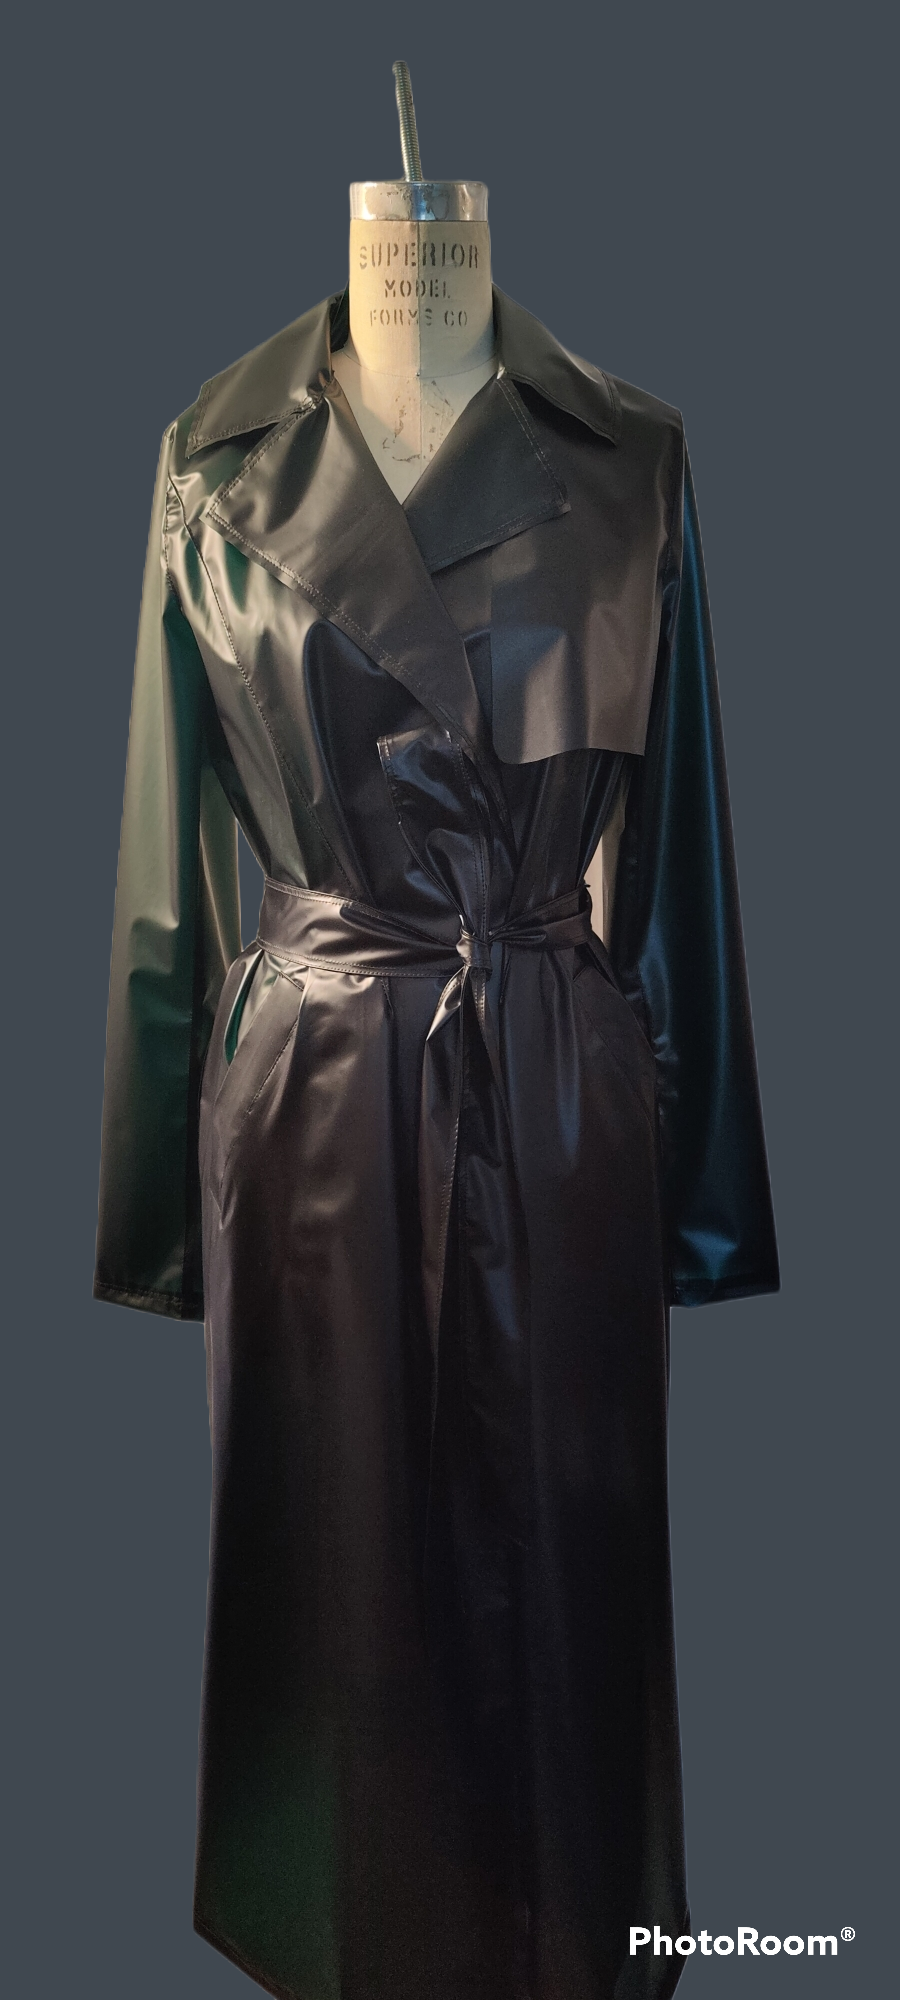 Black lacquer leather trench coast with double breasted detail and waist belt